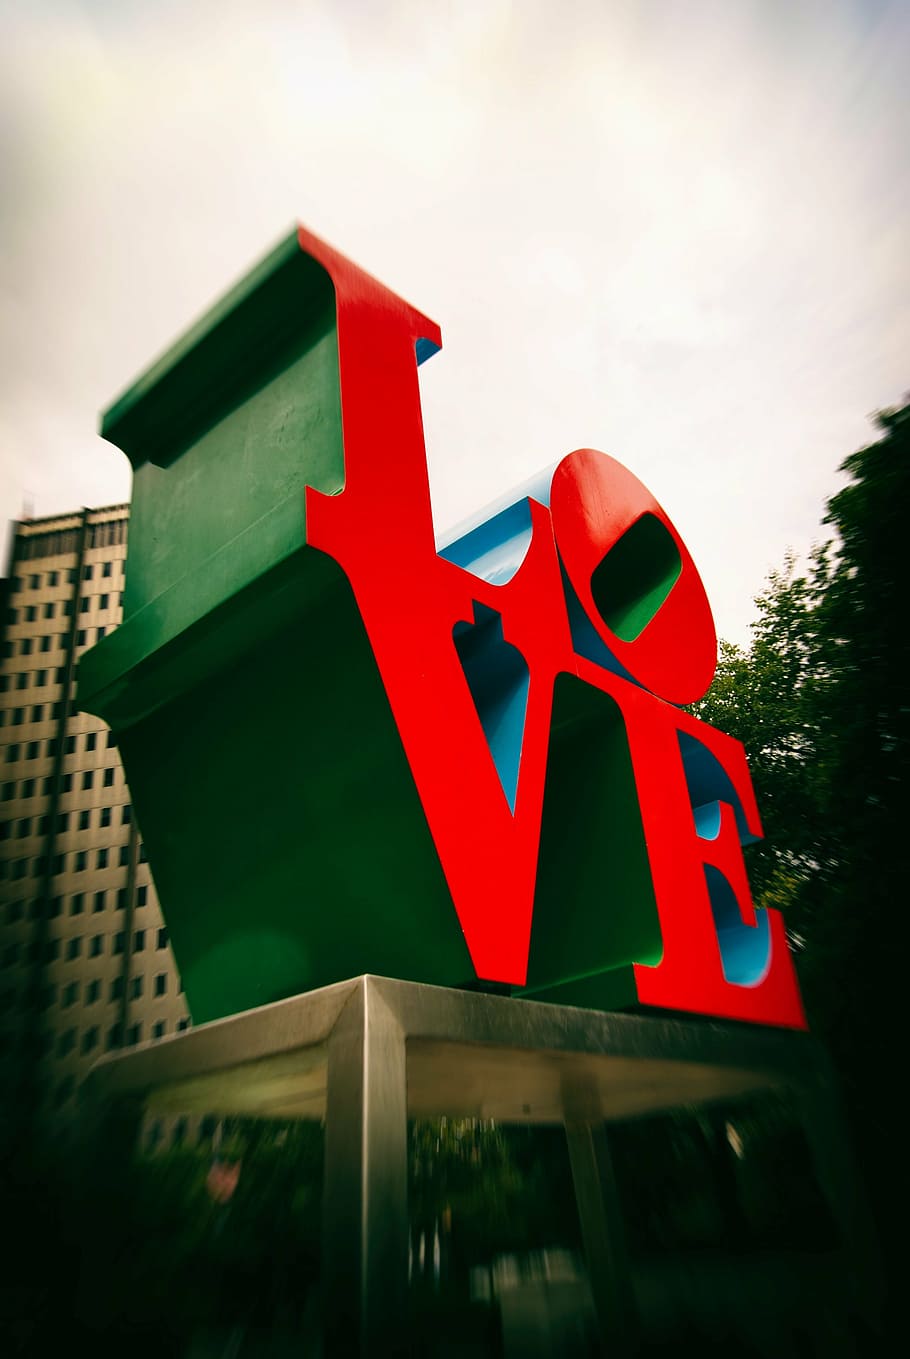 red, green, love statue, architecture, building, infrastructure, design, blur, love, built structure